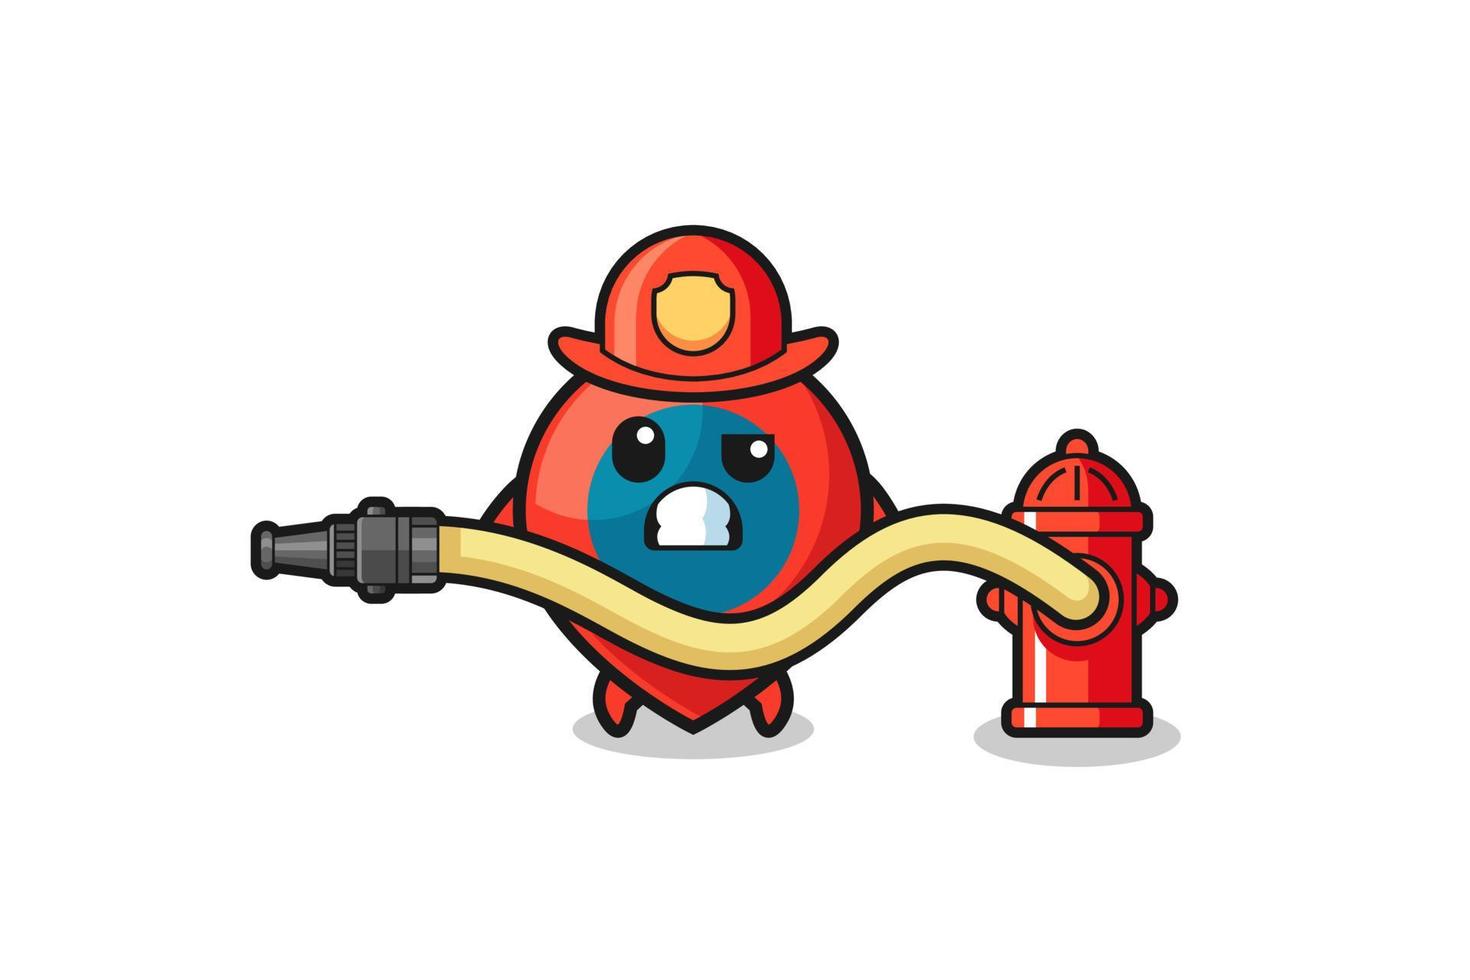 location symbol cartoon as firefighter mascot with water hose vector